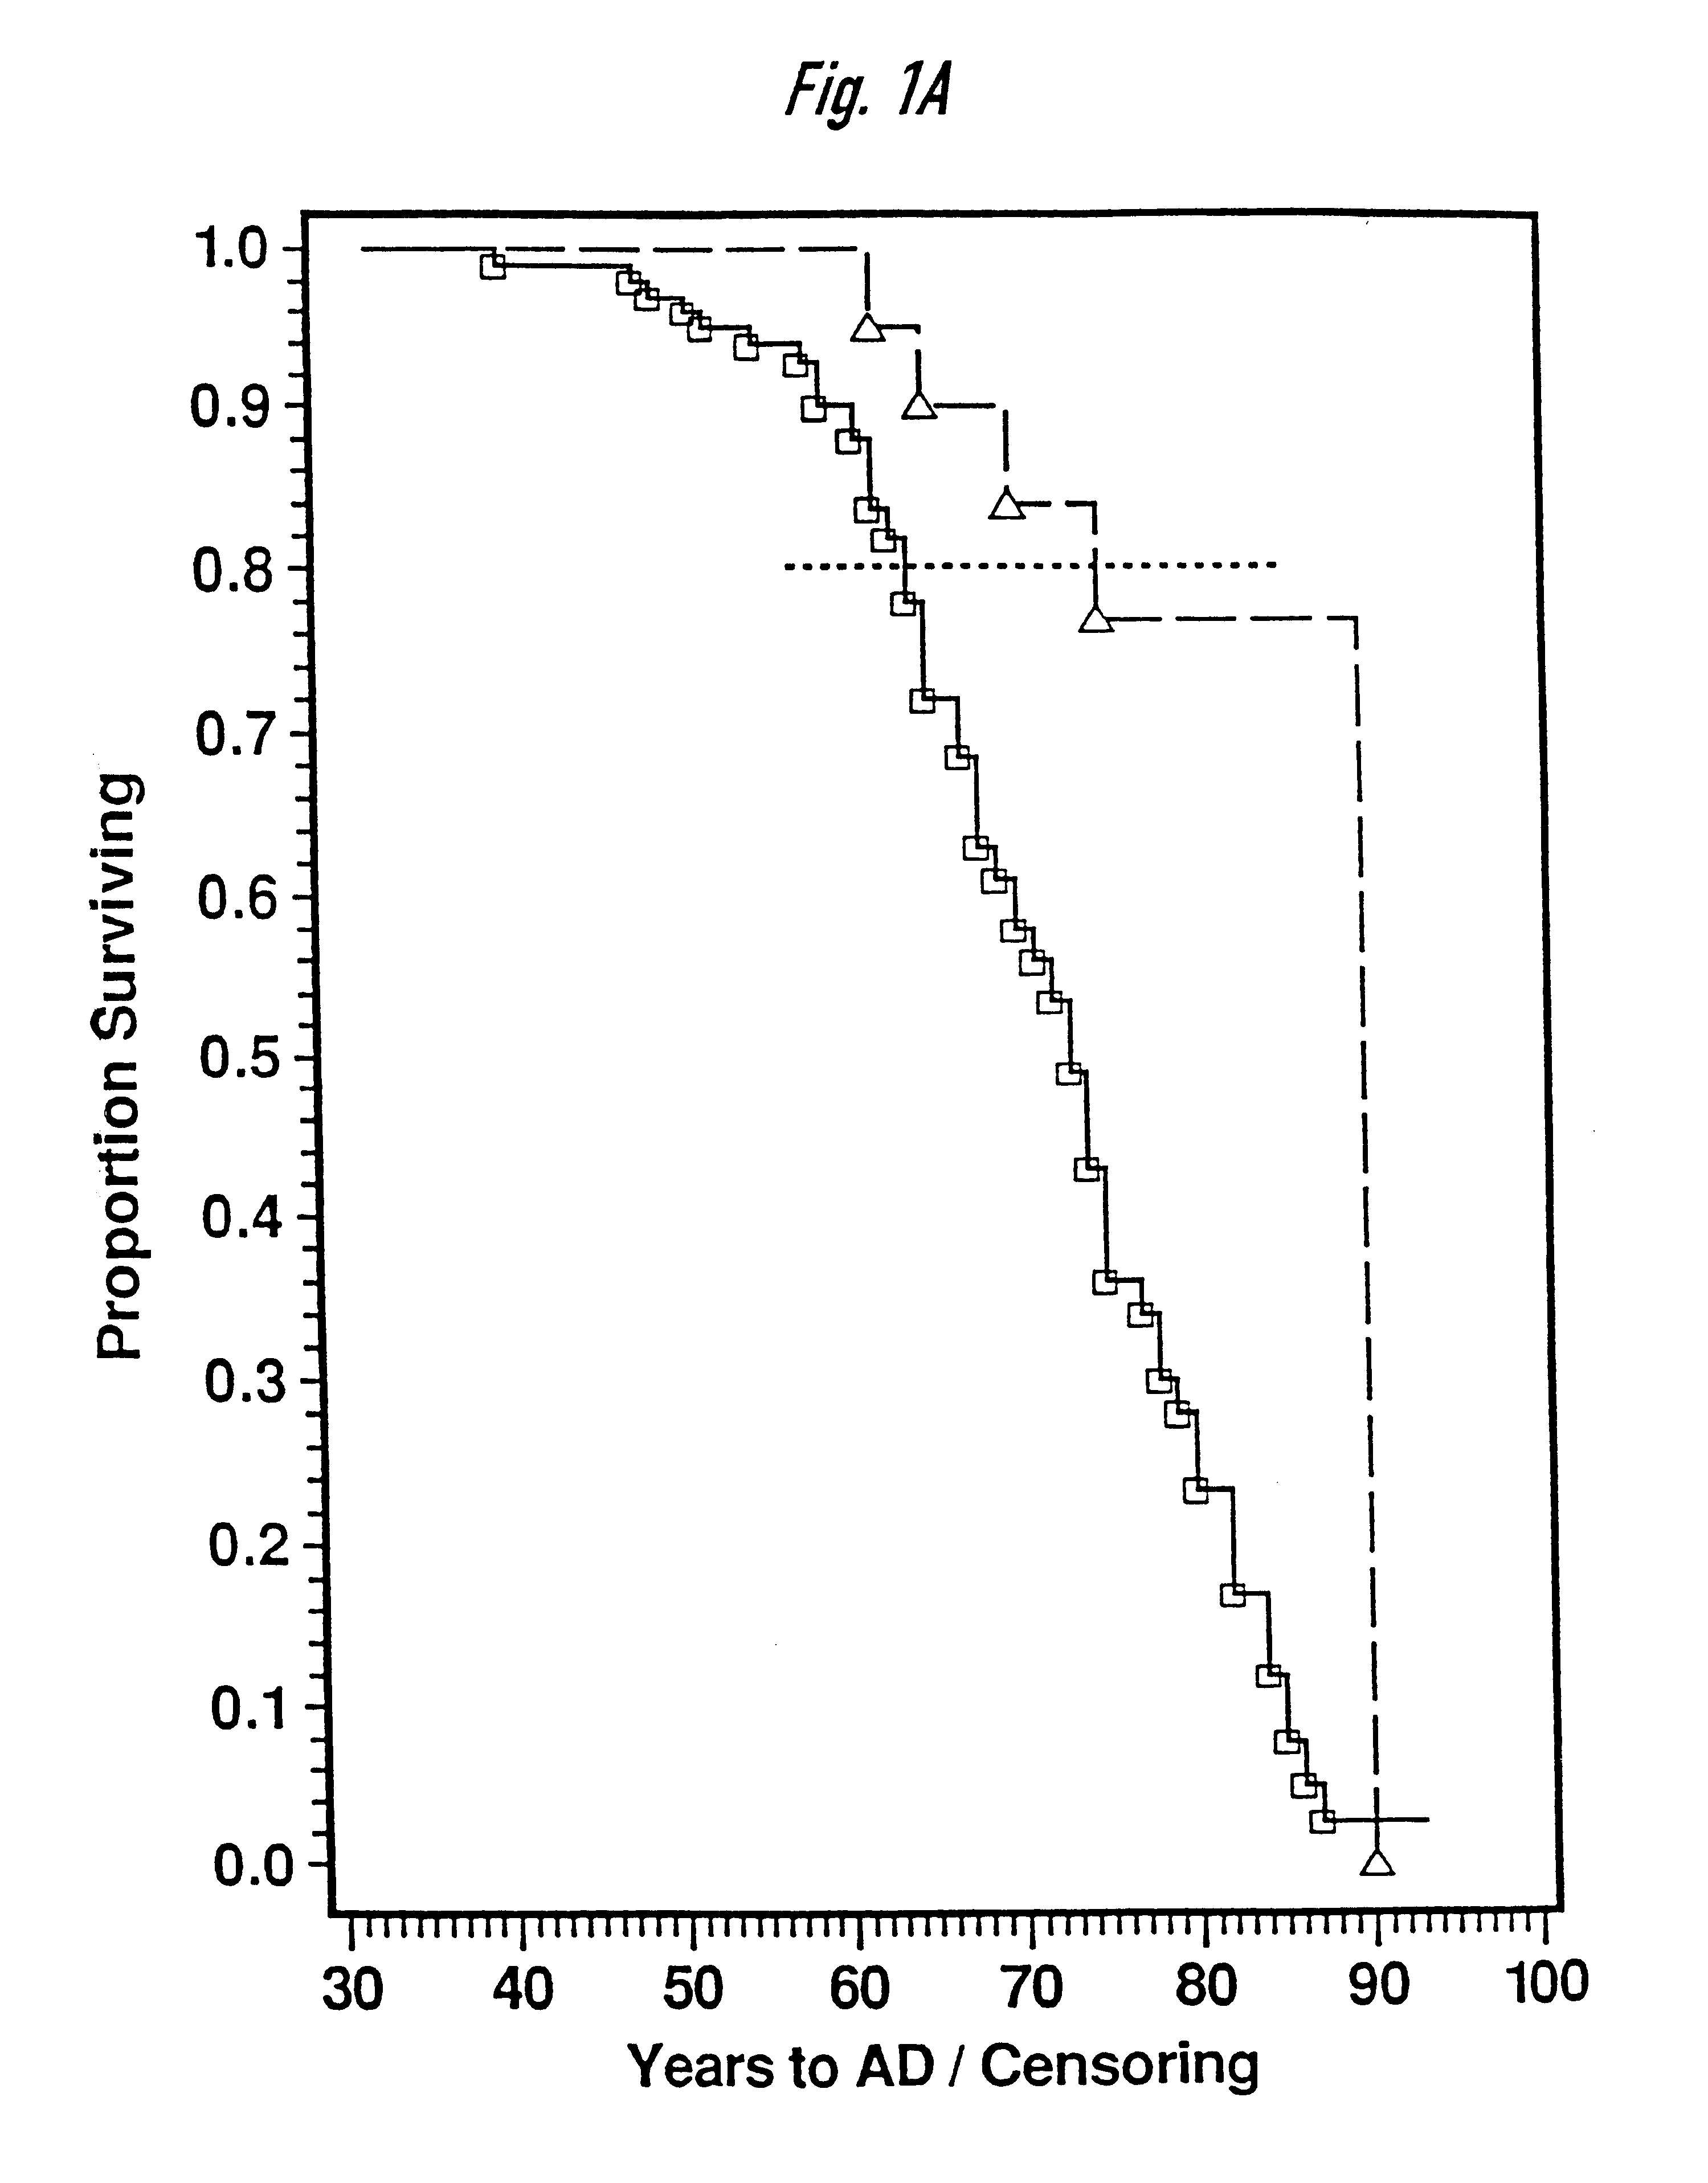 Method of preventing of delaying the onset and progression of Alzheimer's disease and related disorders